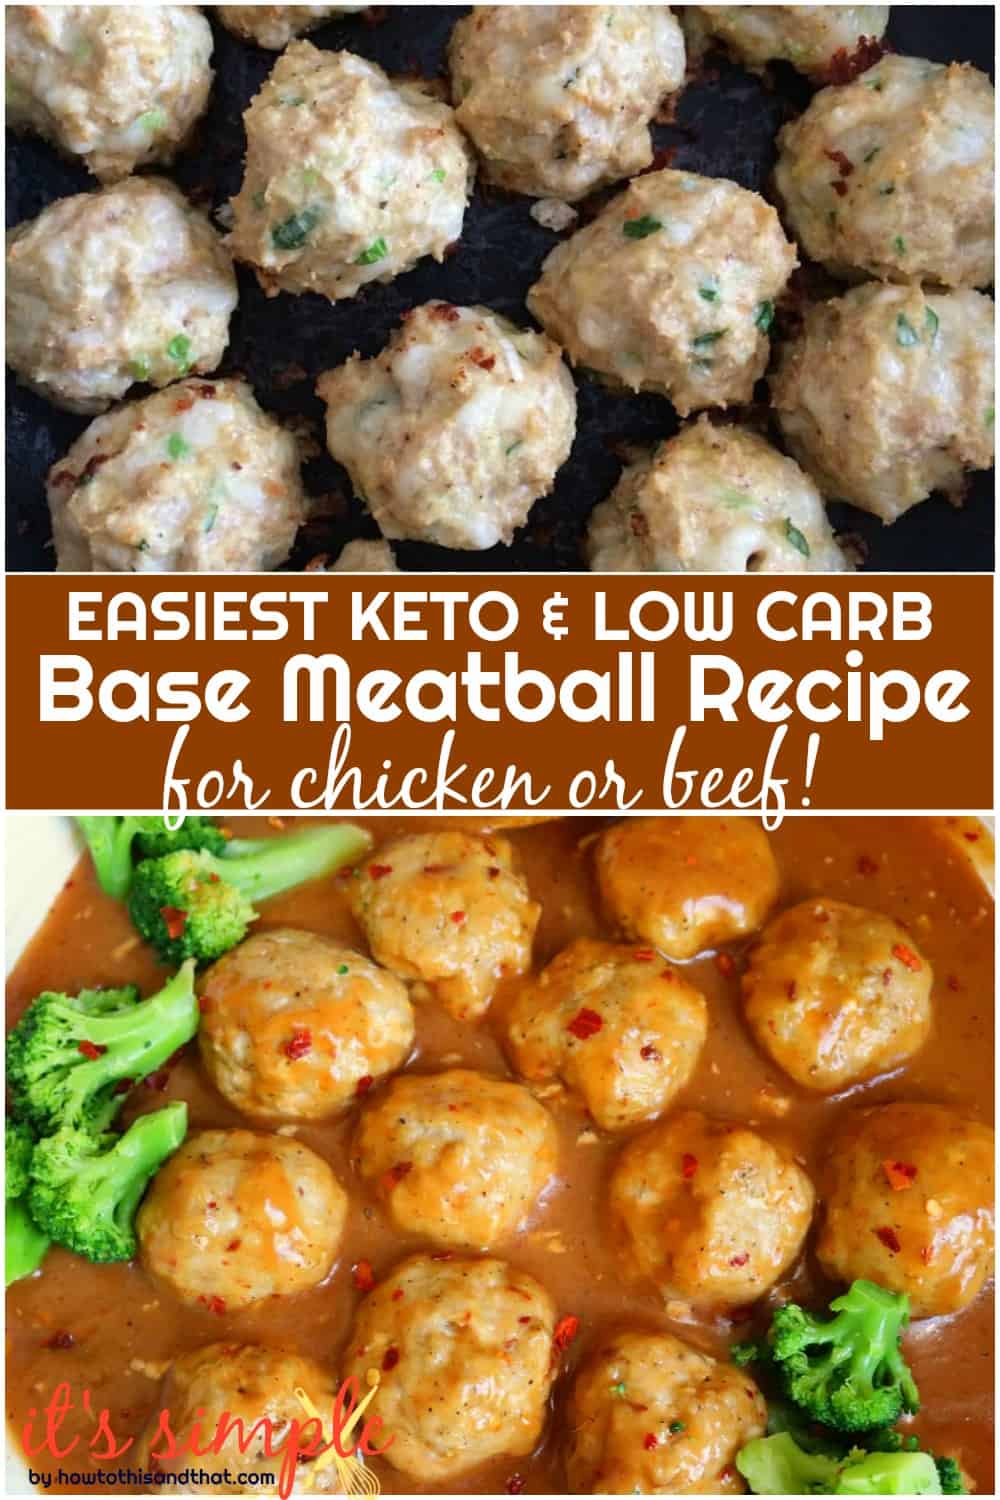 Low Carb Meatballs Recipe- Buffalo Chicken Style